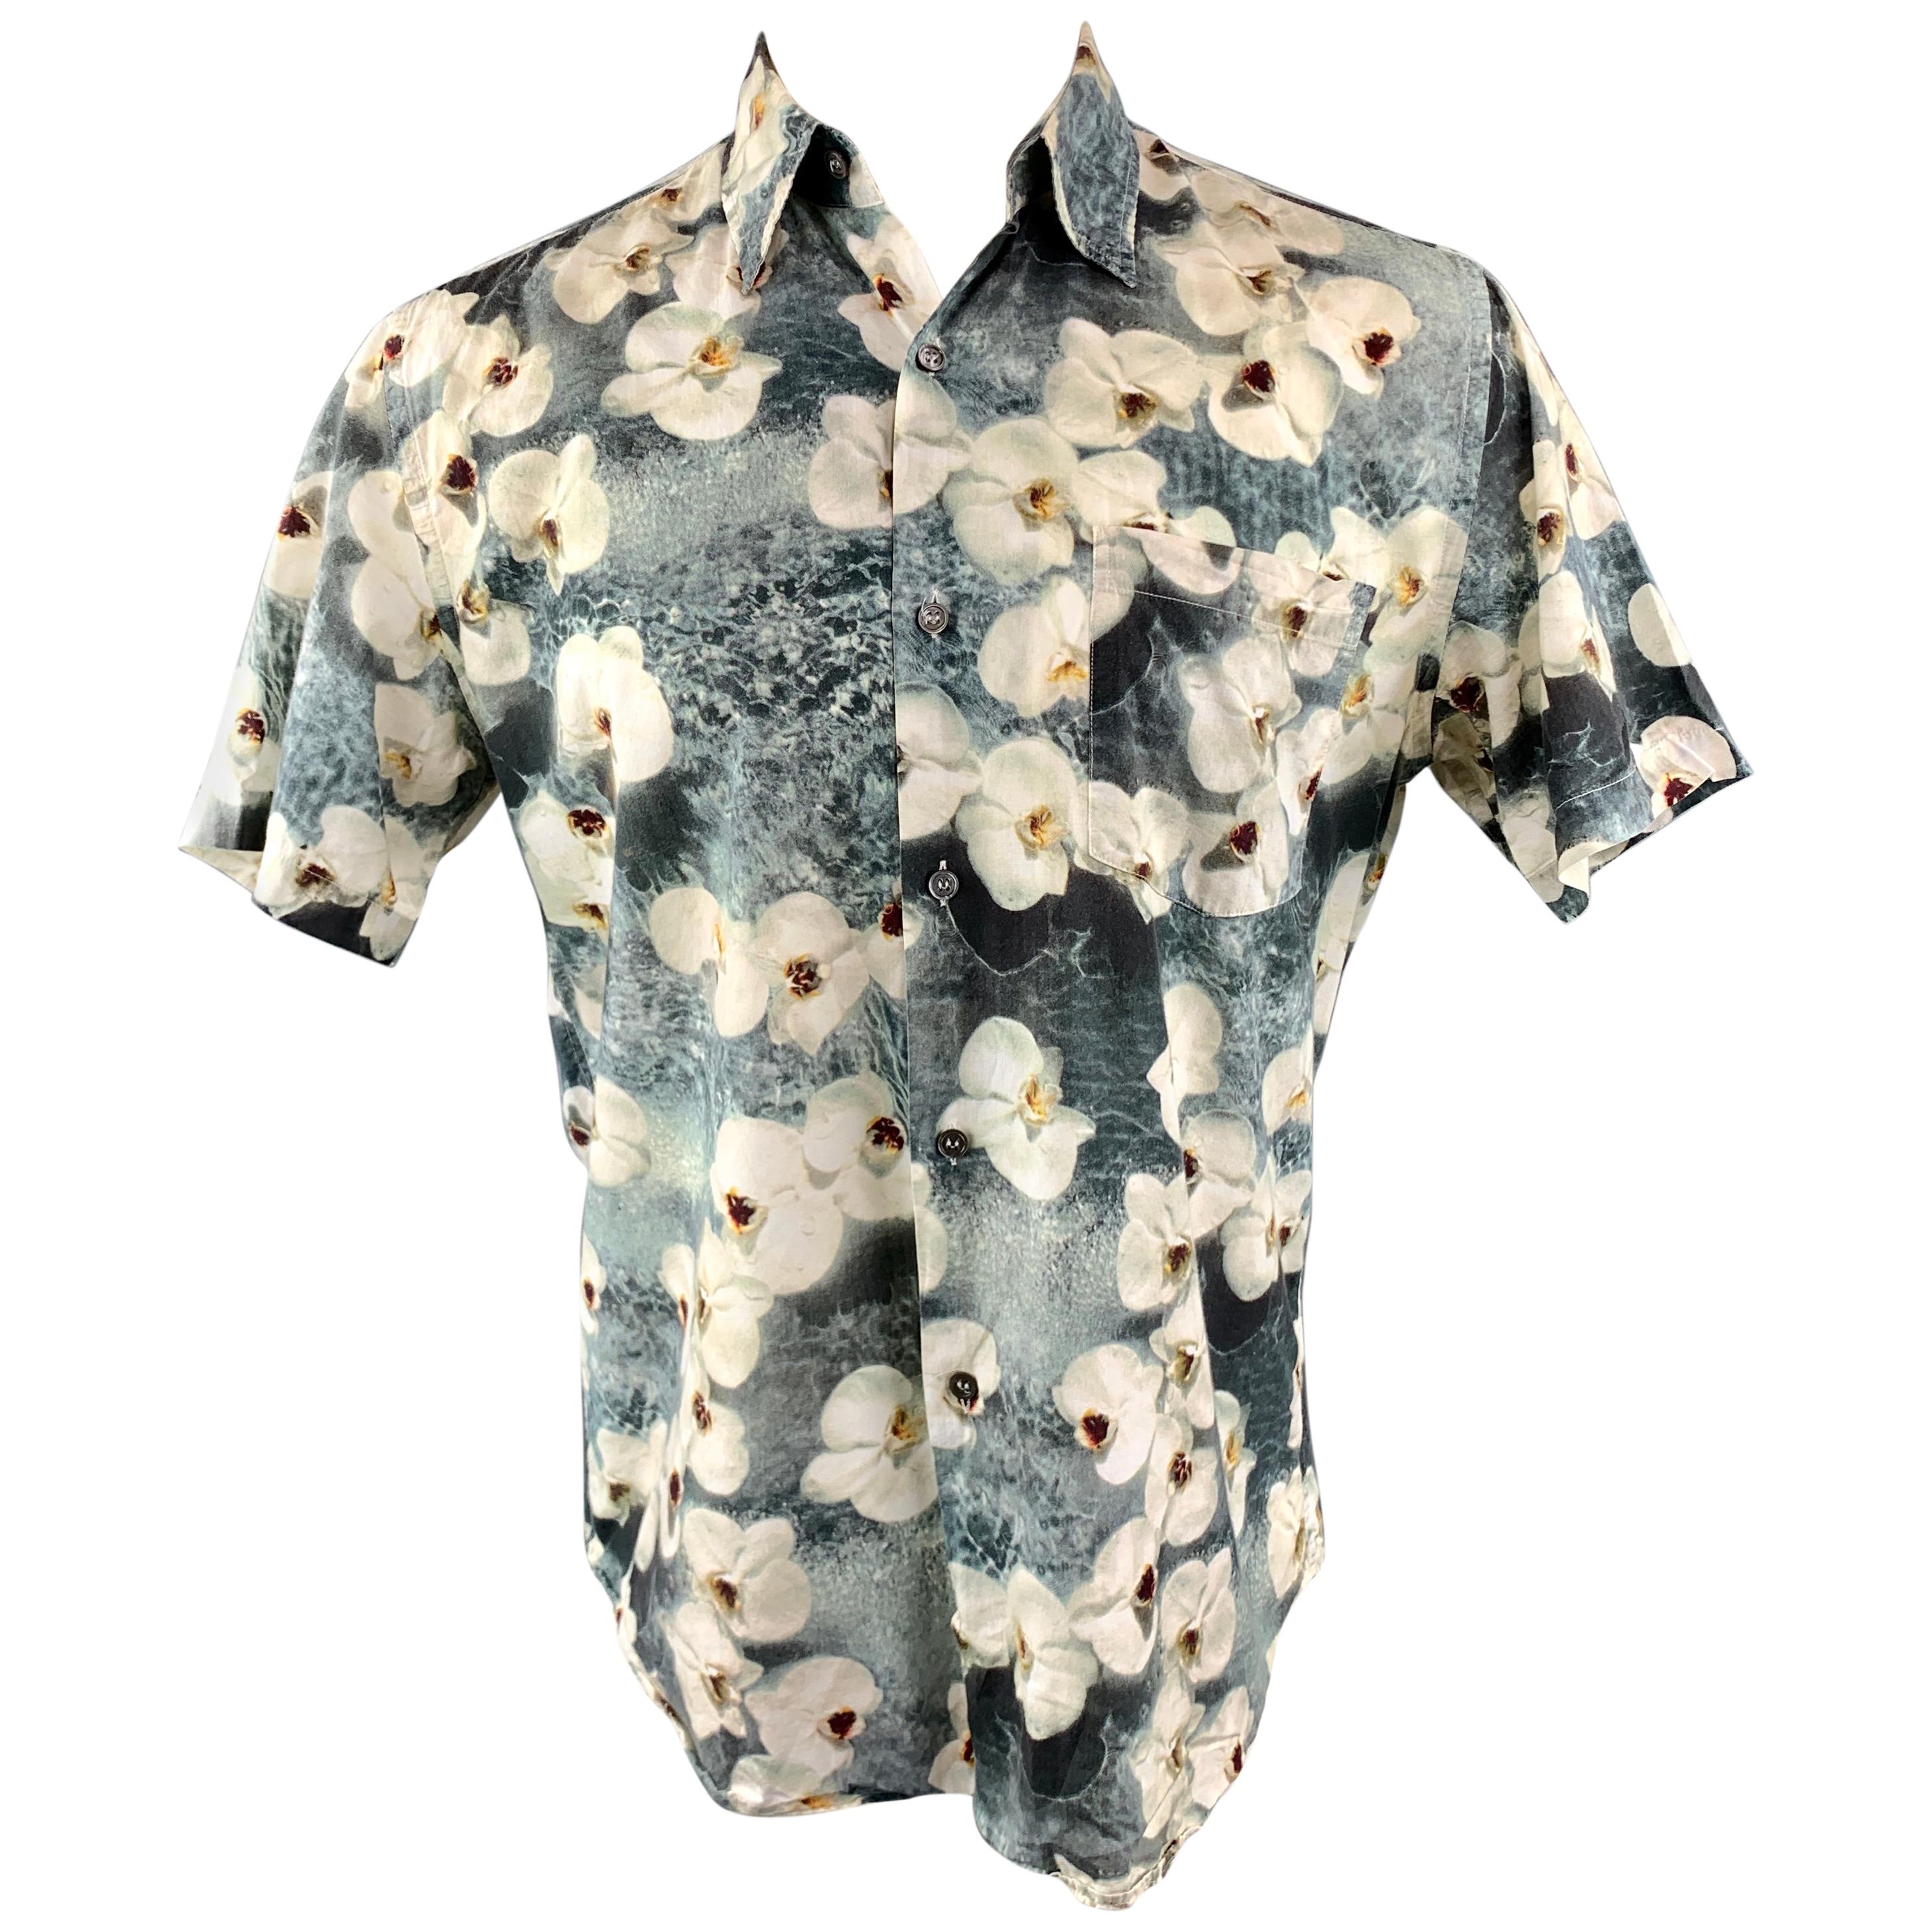 PAUL SMITH Size M Gray Floral Cotton Button Up Short Sleeve Shirt